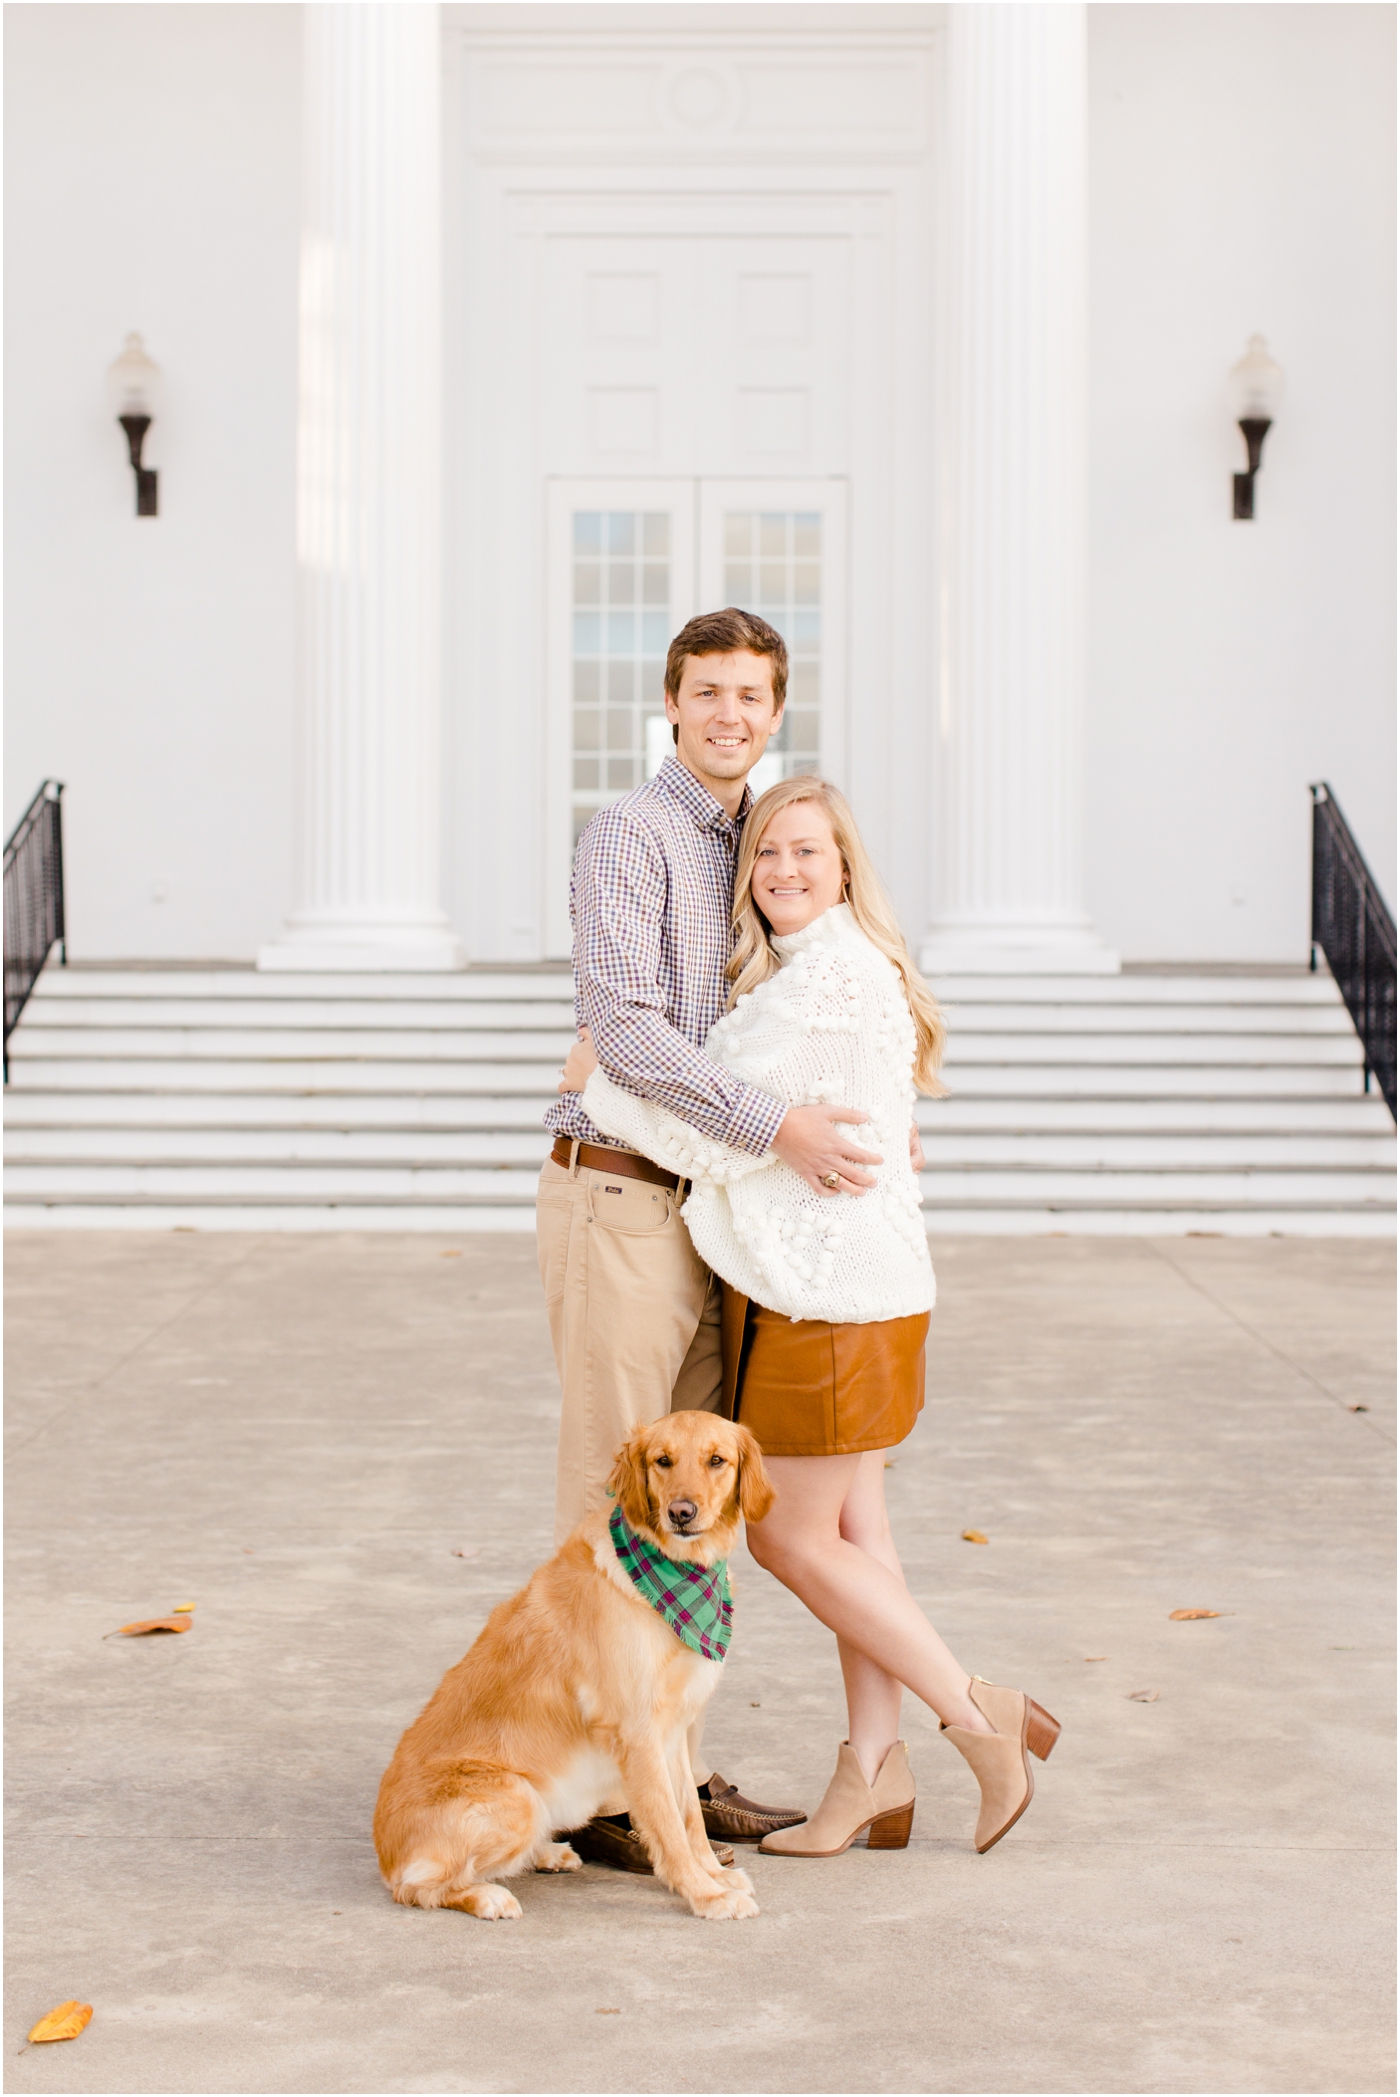 Spartanburg portrait photographer fall session at USC upstate